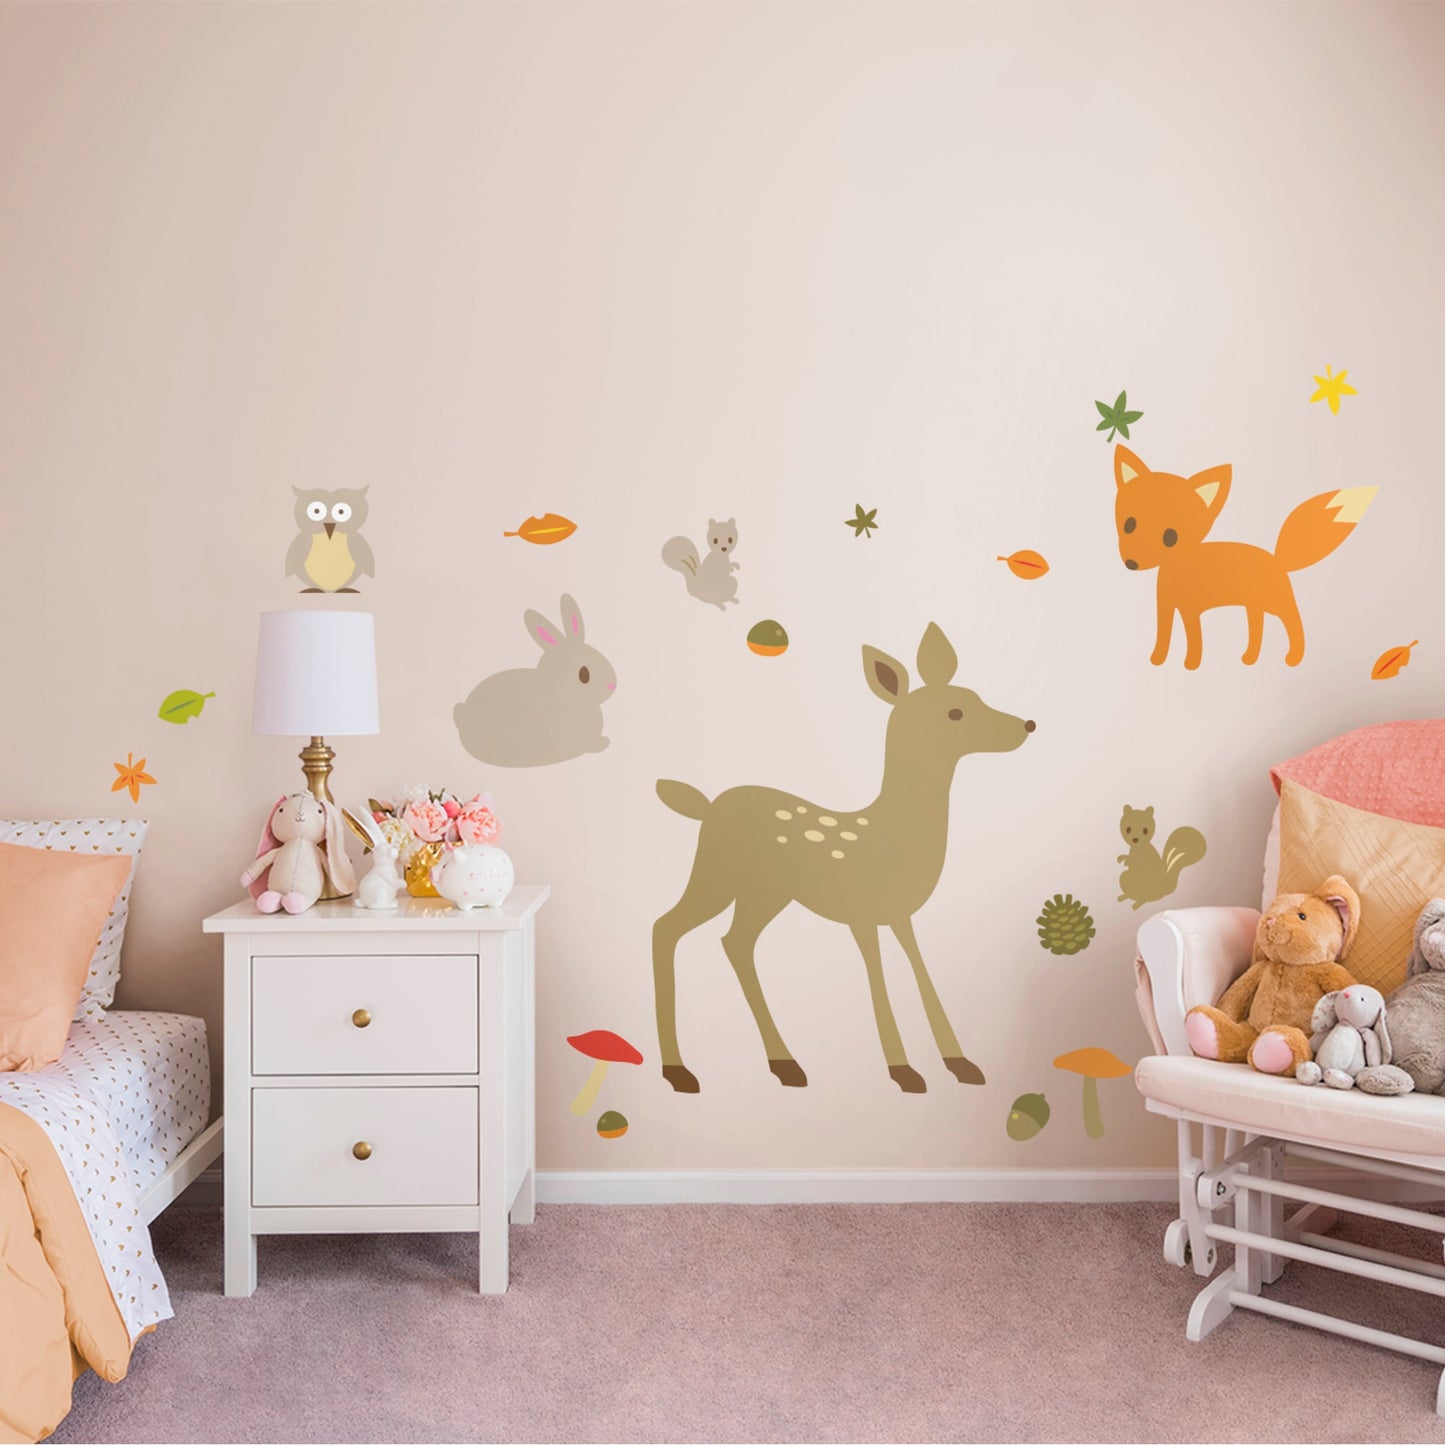 Nursery: Woodland Theme Collection - Removable Wall Decals